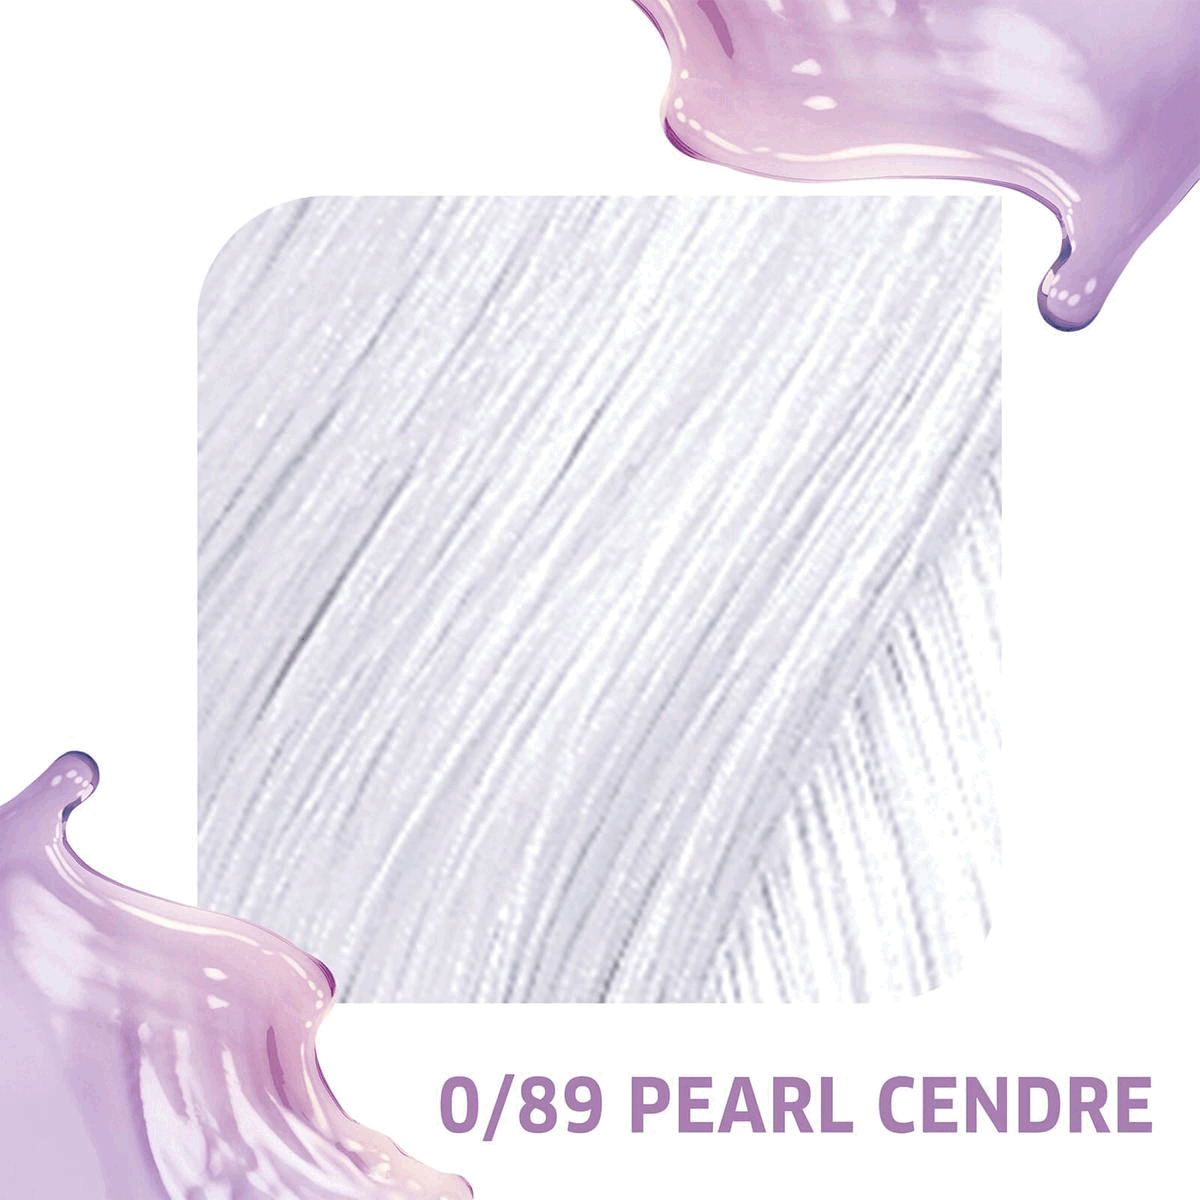 Image 1, 0/89 Pearl Cendre Semi-Permenant Colour enhance. Image 2, 0/89 Pearl Cendre Semi-Permenant Colour enhance . Image 3, Direct Dies and Vitamin Care Complex
            . Image 4, Lasts Up to 10 Shampoos. Image 5,Colour, depth and tone. Image 6,Quick and Easy Application.